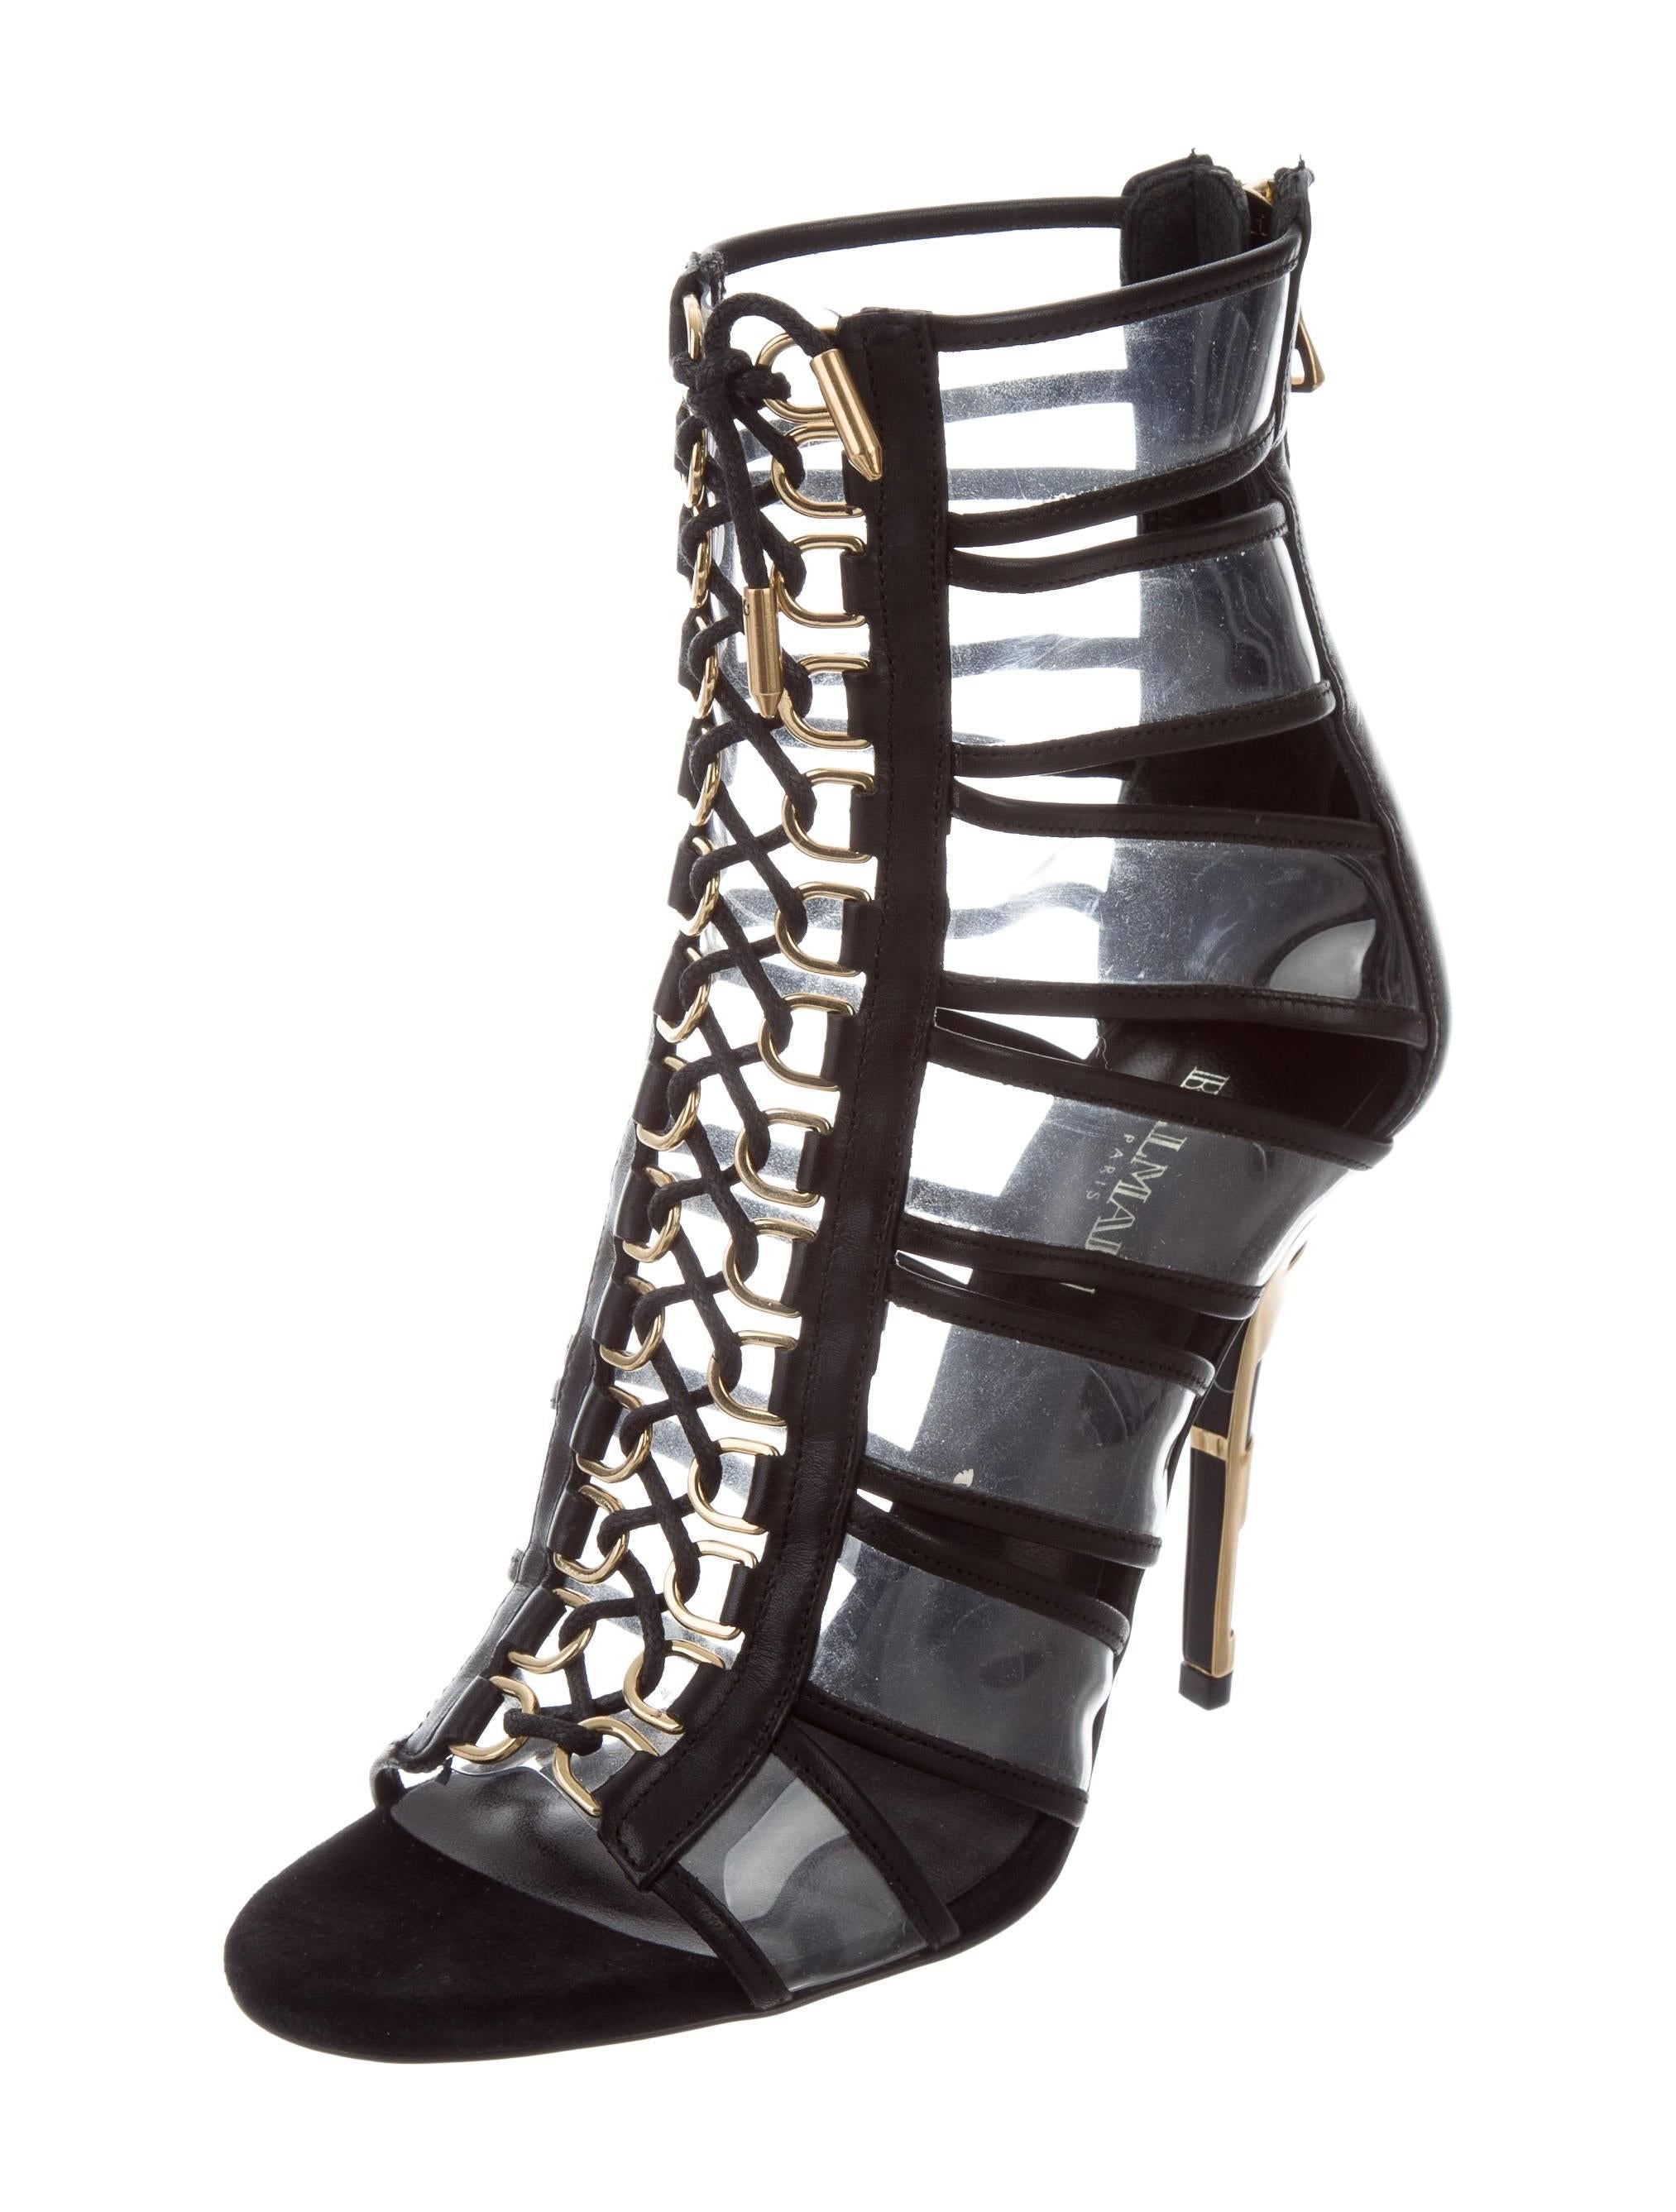 Balmain New Black Leather Clear Gold Lace Up Evening Ankle Boots Booties in Box 

Original purchase price $2,295
Size IT 36
Leather
PVC 
Gold tone hardware
Lace up closure
Heel height 4